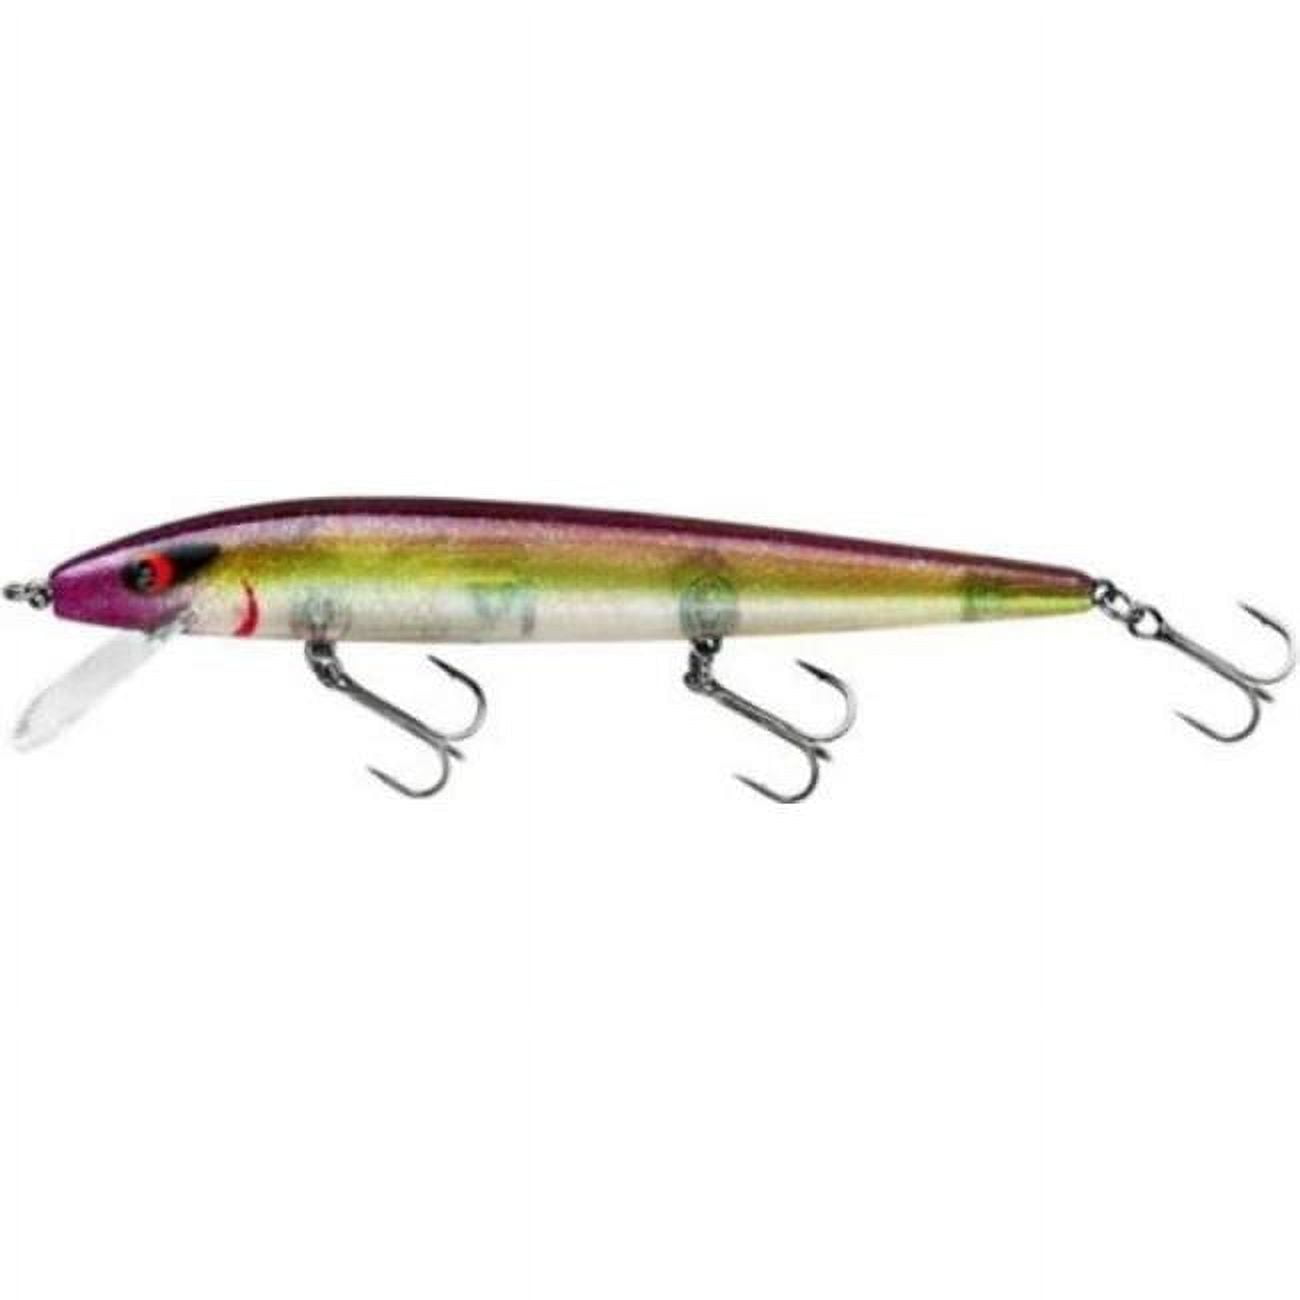 Smithwick Perfect 10 Rogue Fishing Lure Hard bait Lady 5 1/2 in 5